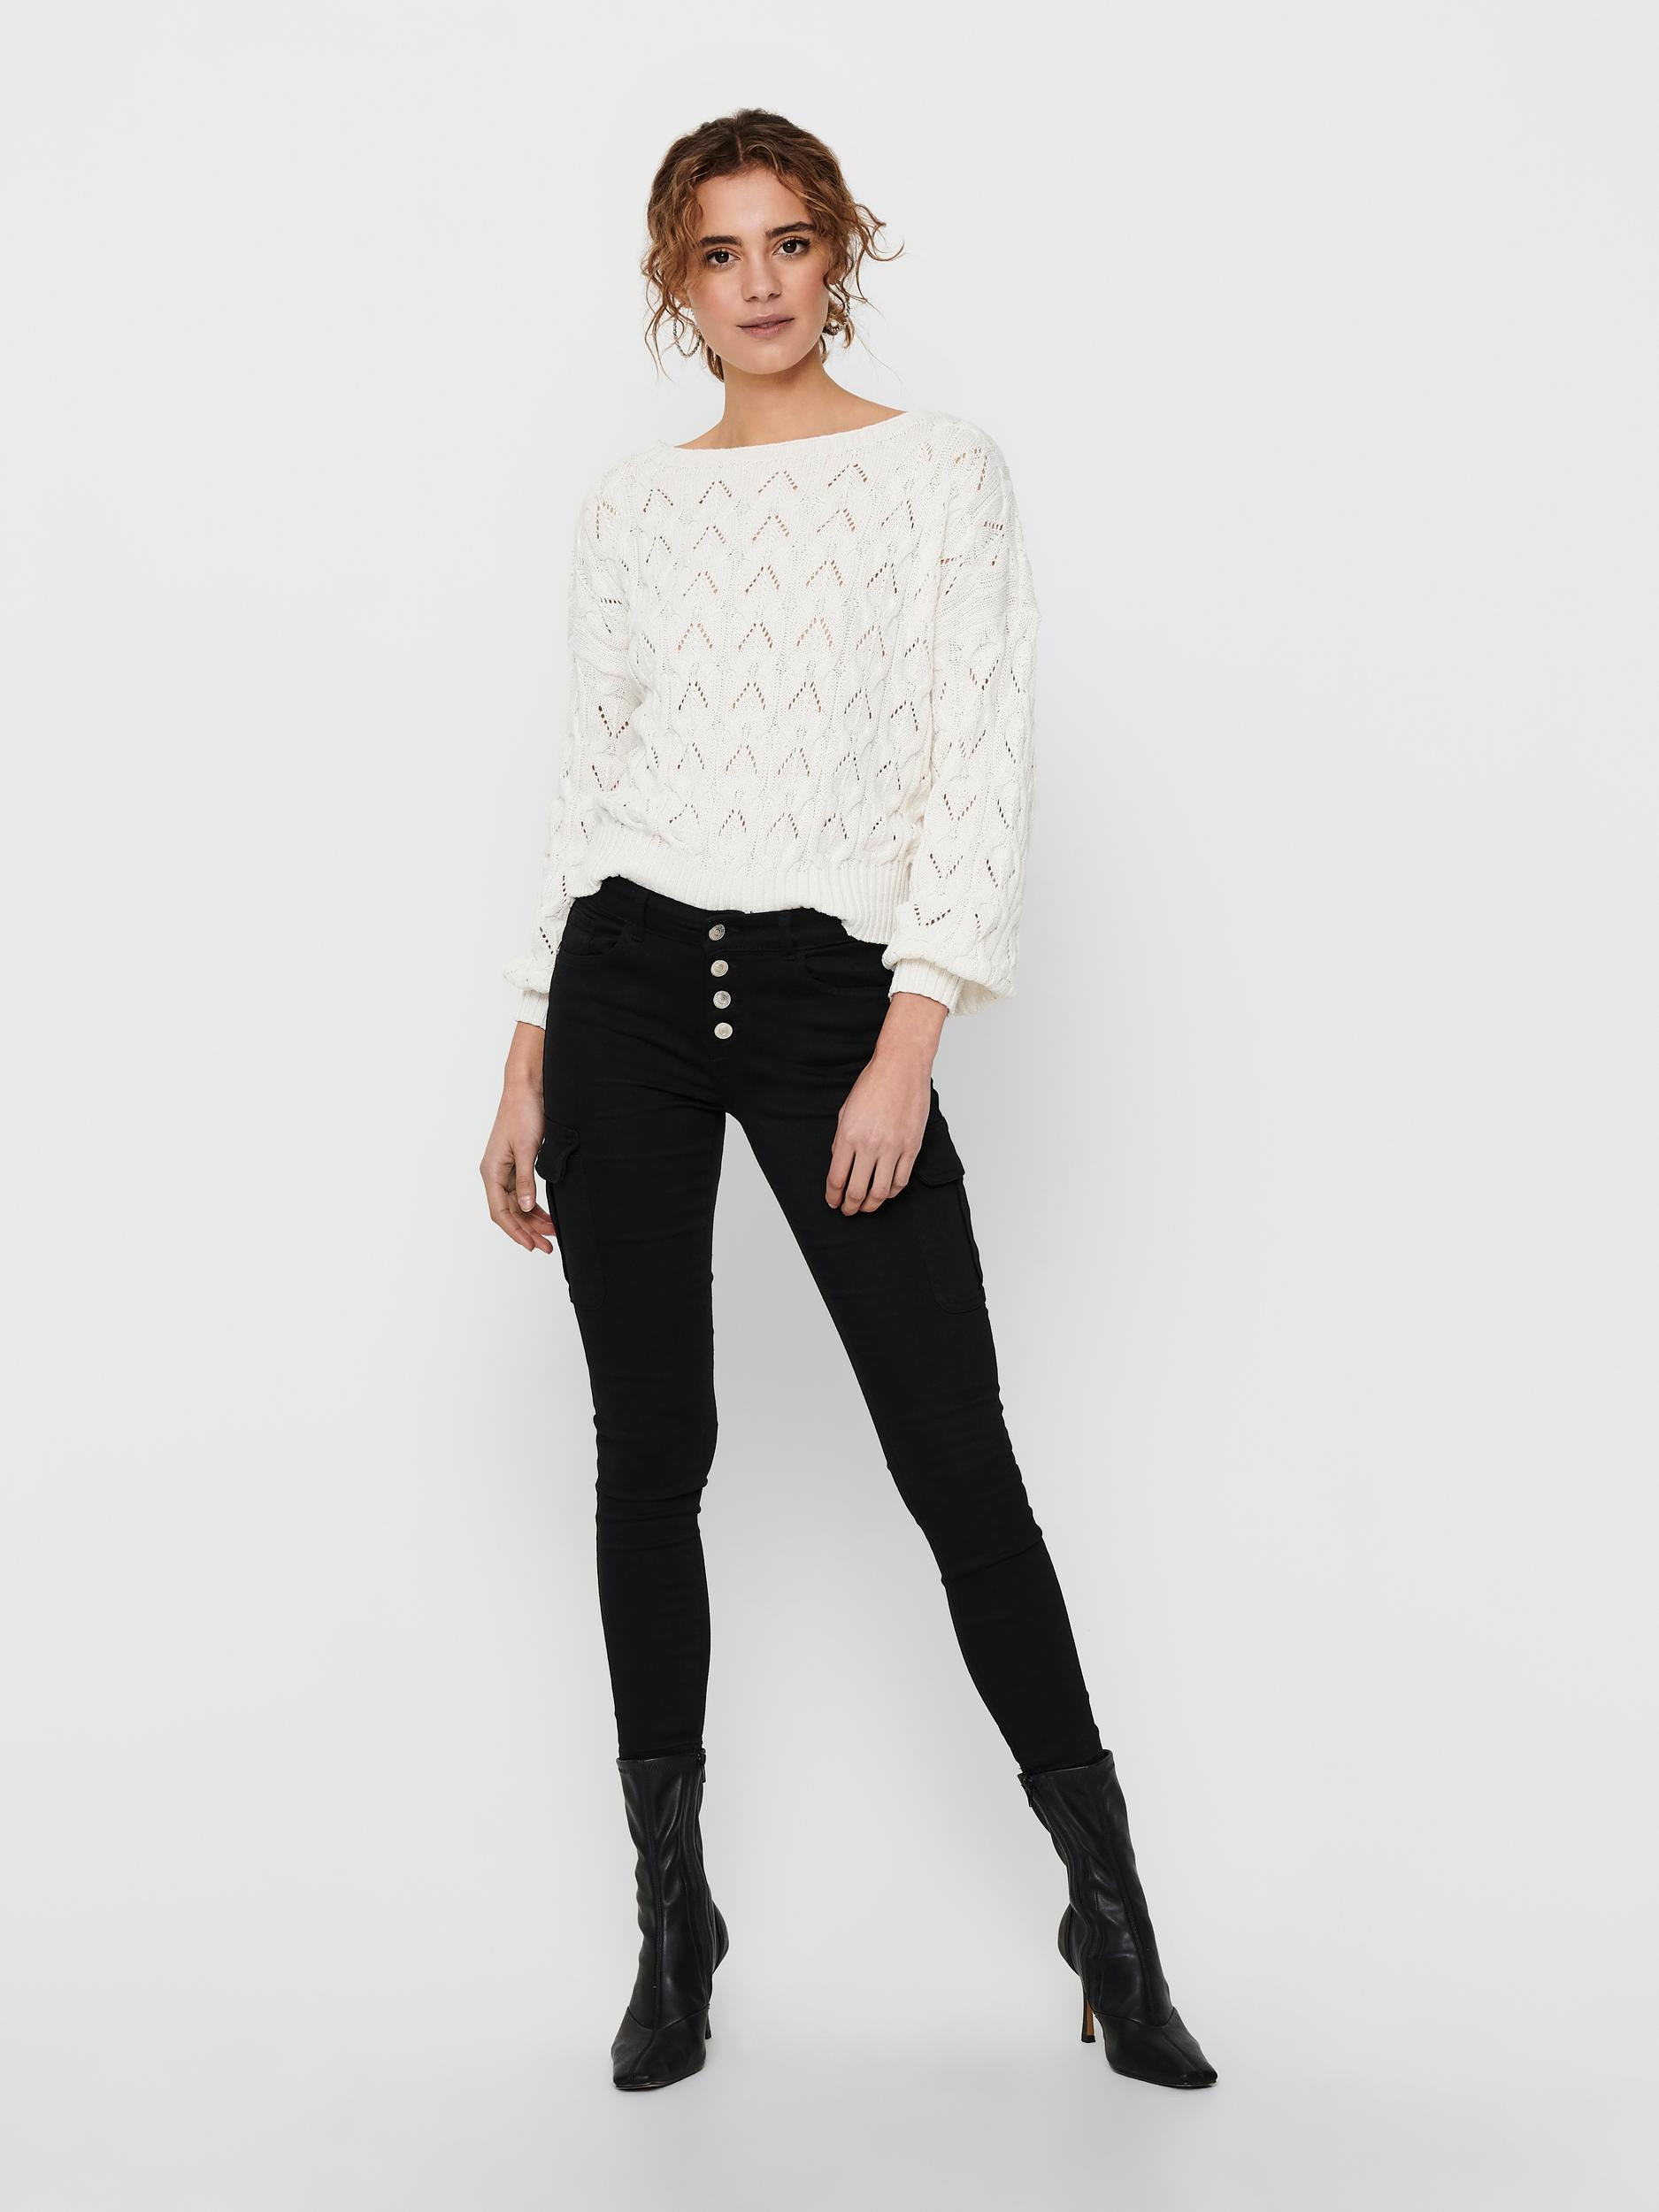 Only - Boat neck pullover with pointelle detail, White, large image number 2